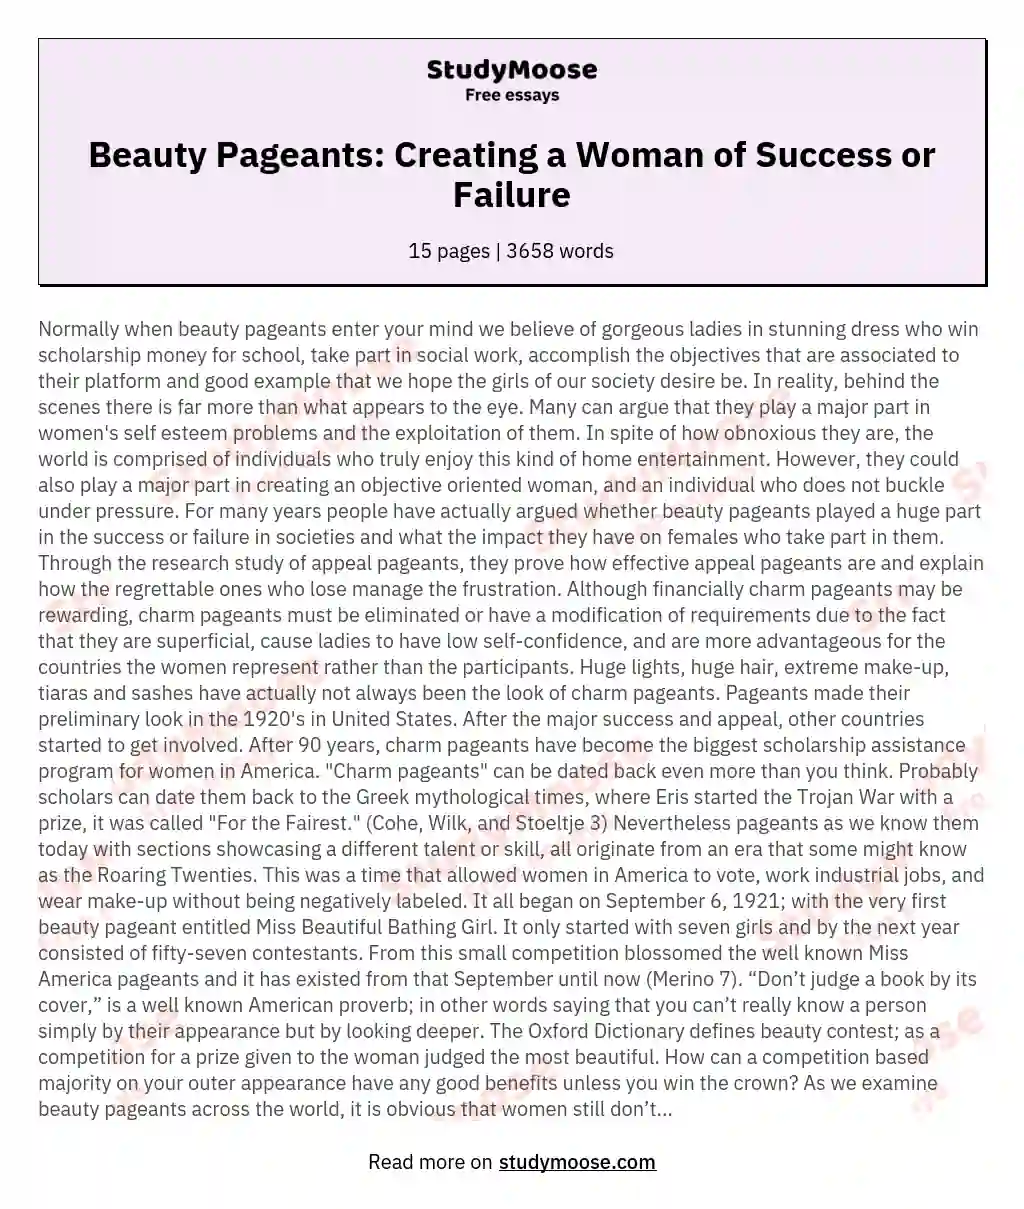 Beauty Pageants: Creating a Woman of Success or Failure essay